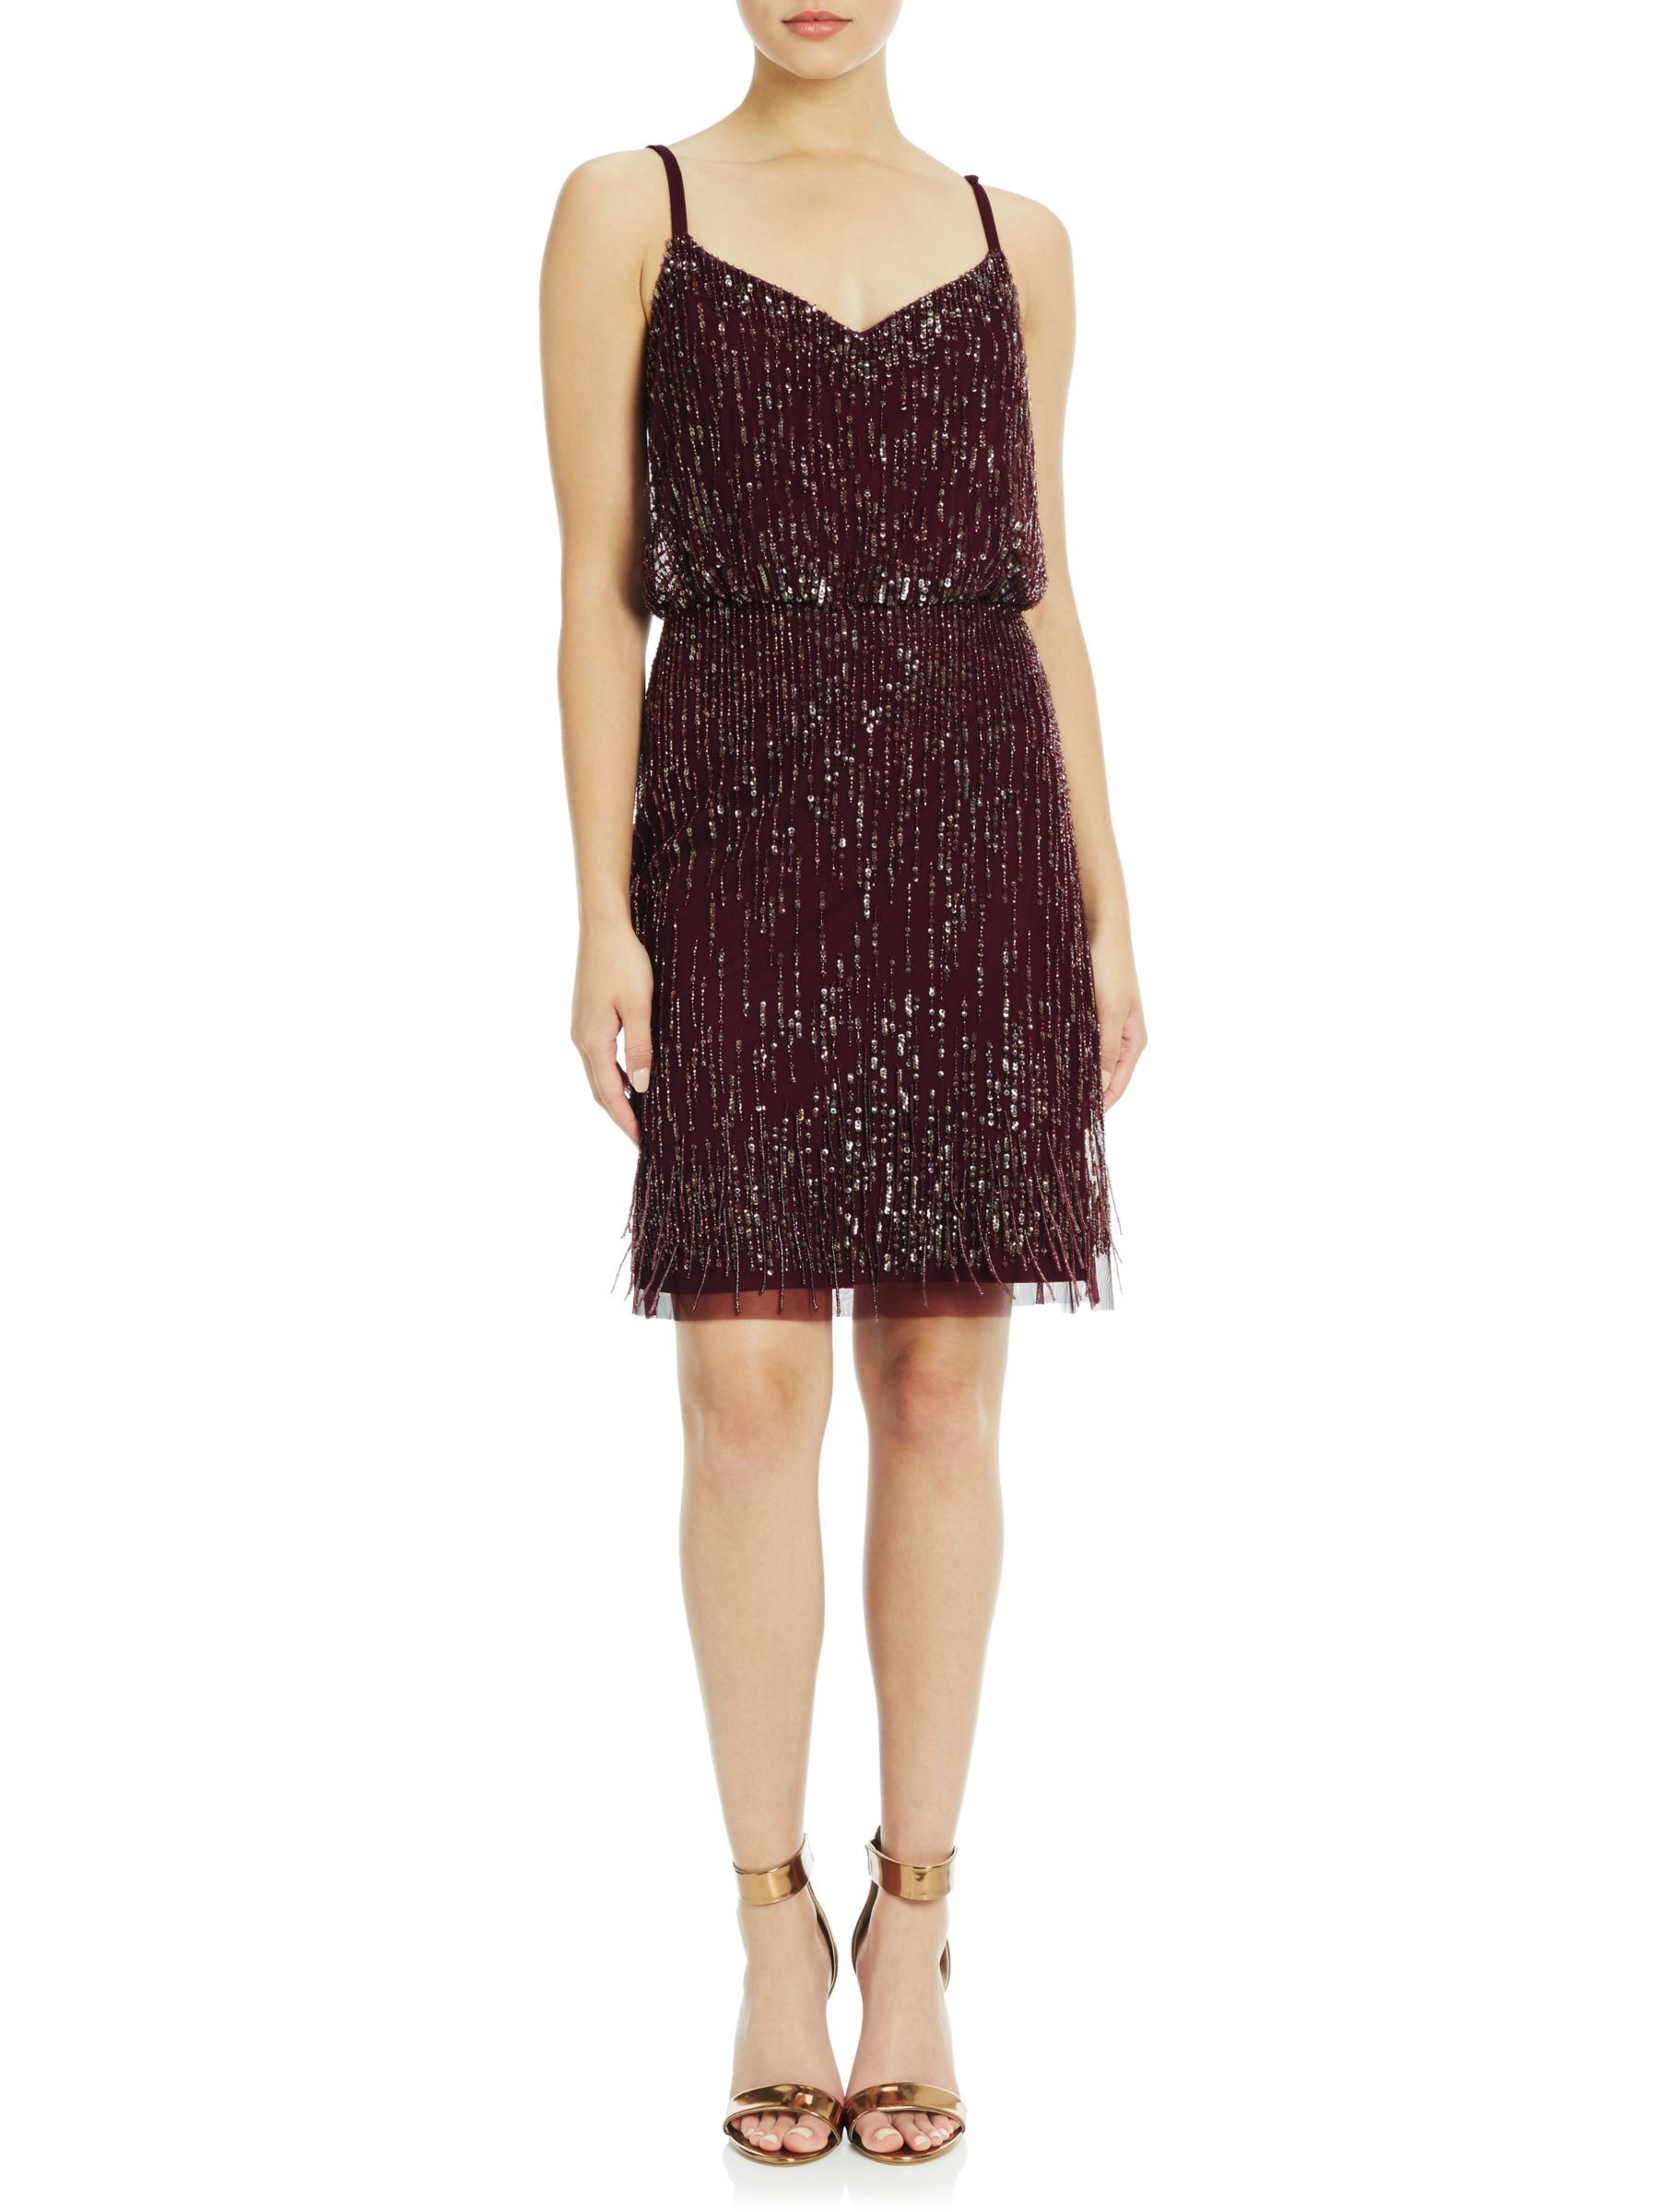 Adrianna Papell Spaghetti Strap Cocktail Dress With Fringe Detail, Cassis